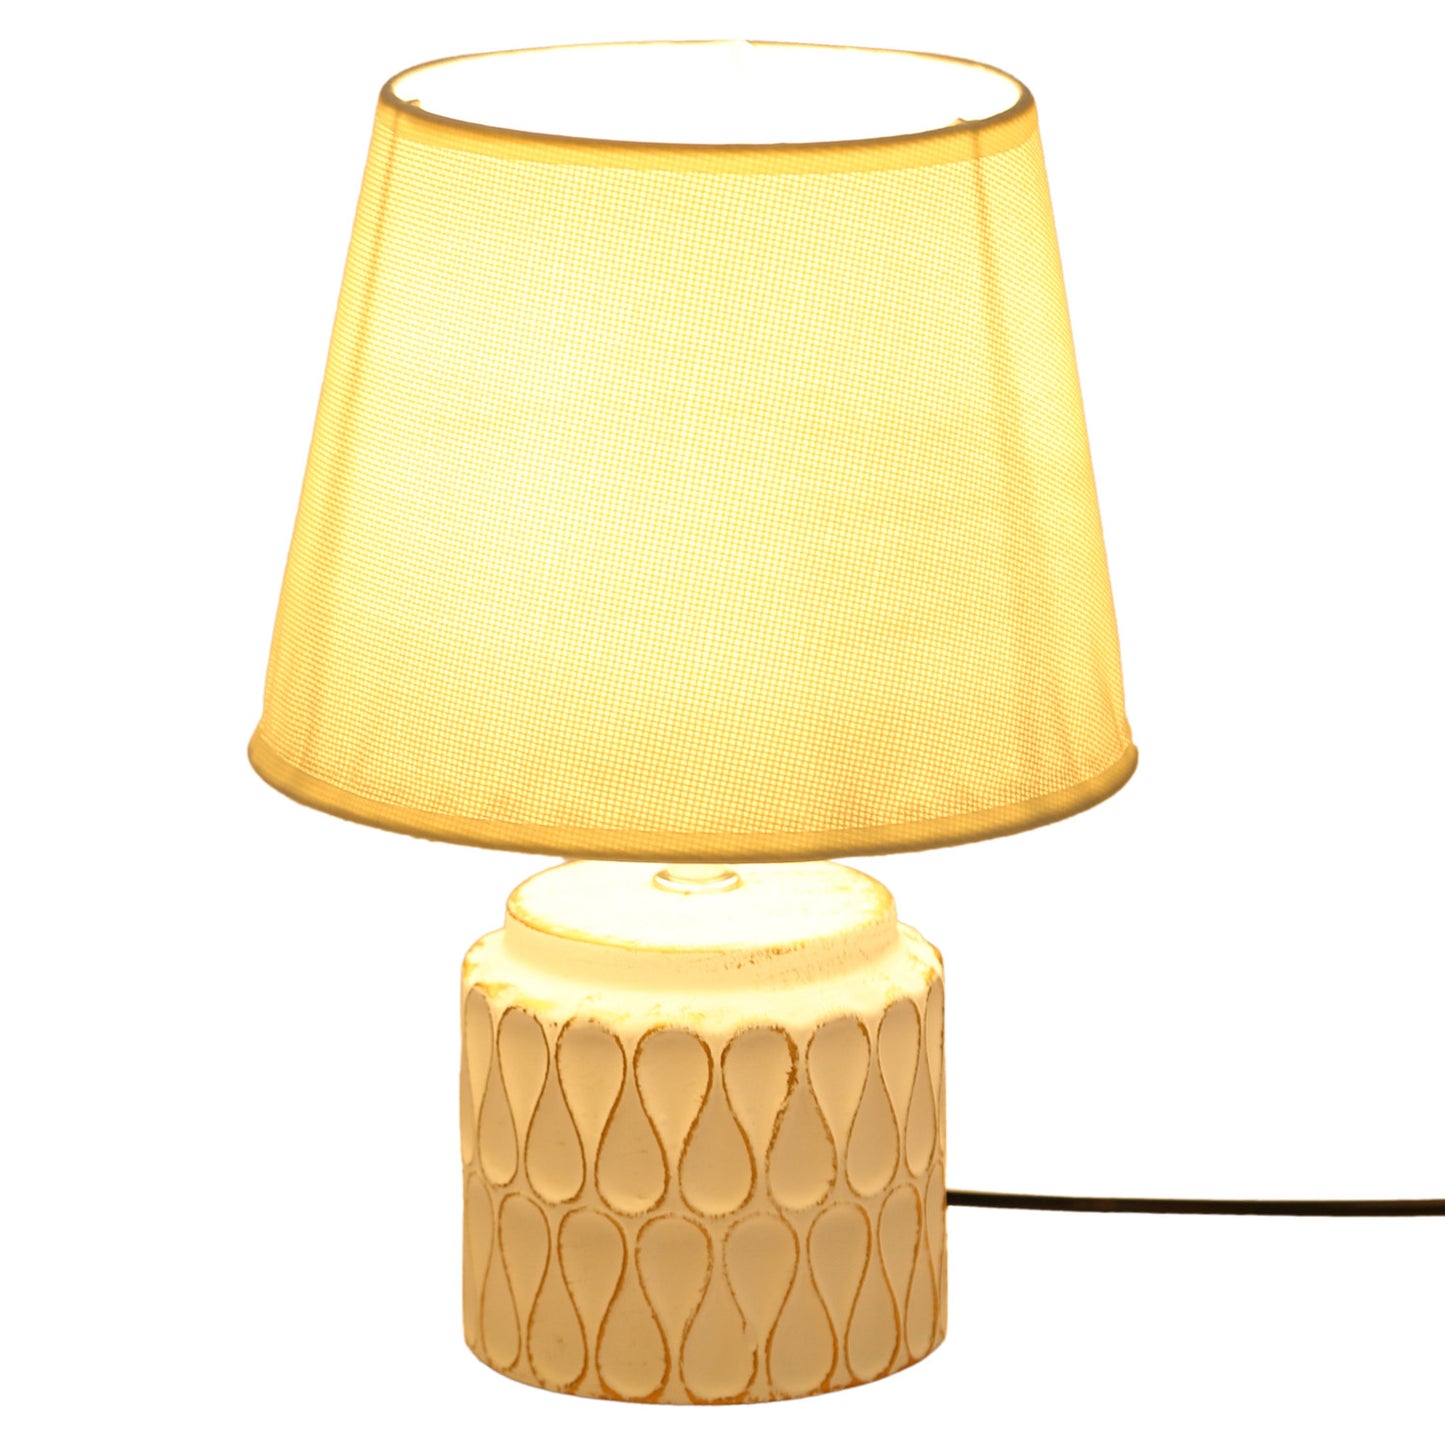 Uniquely Crafted White Ceramic Table Lamp - Default Title (LAM2298WH)